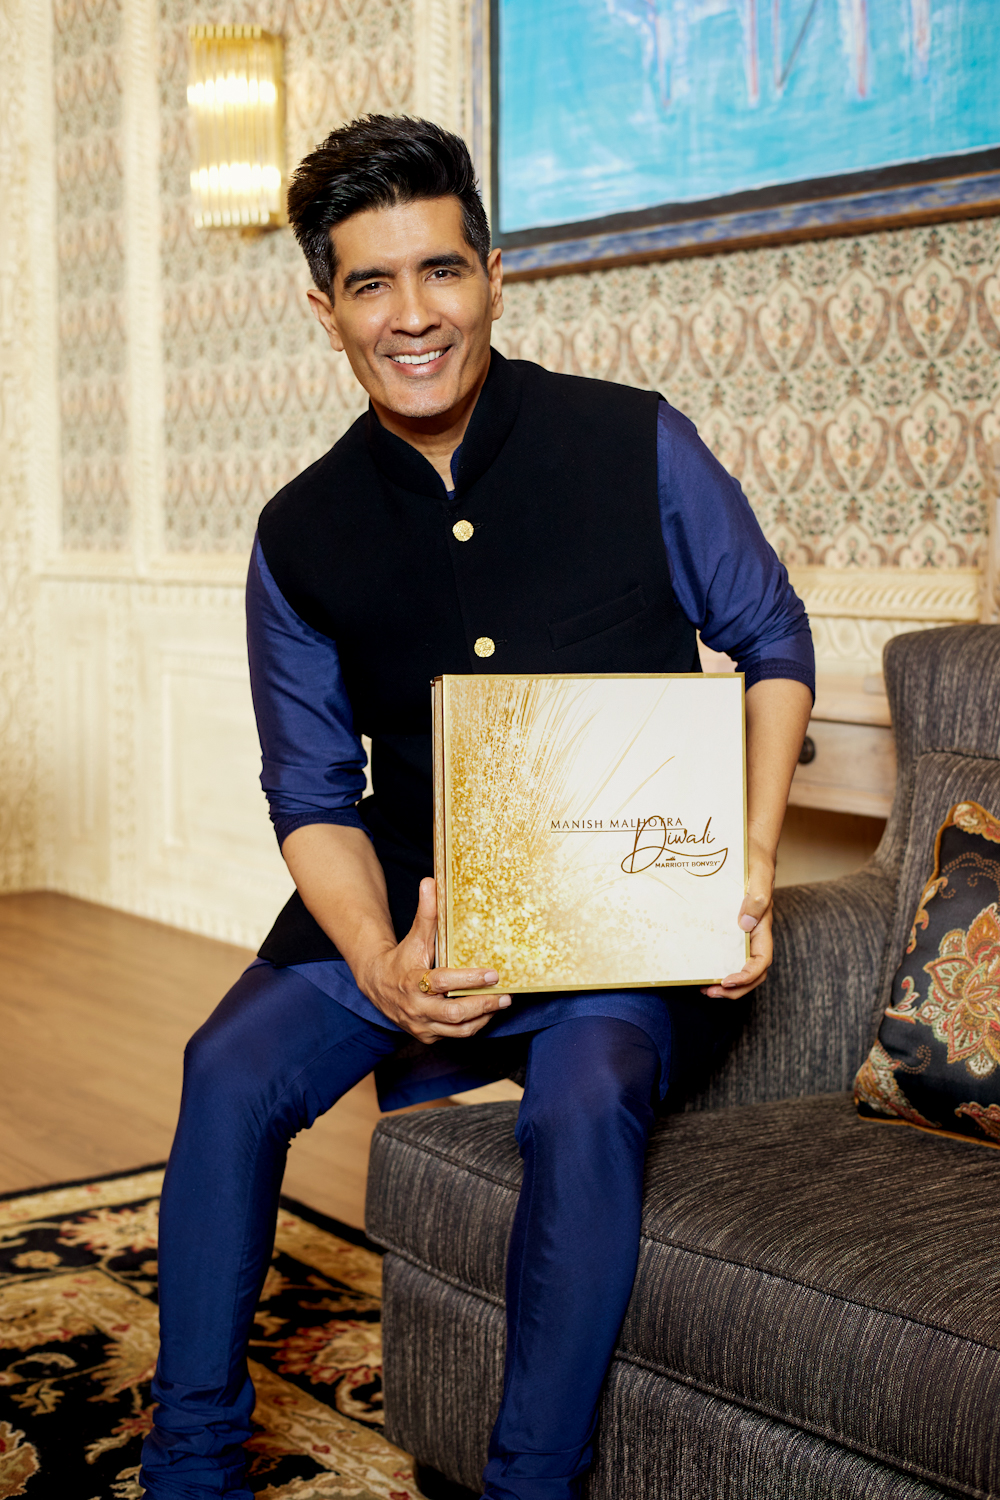 Diwali with Marriott Bonvoy collaborates with Manish Malhotra India’s leading couturier for designer gift hampers this festive season